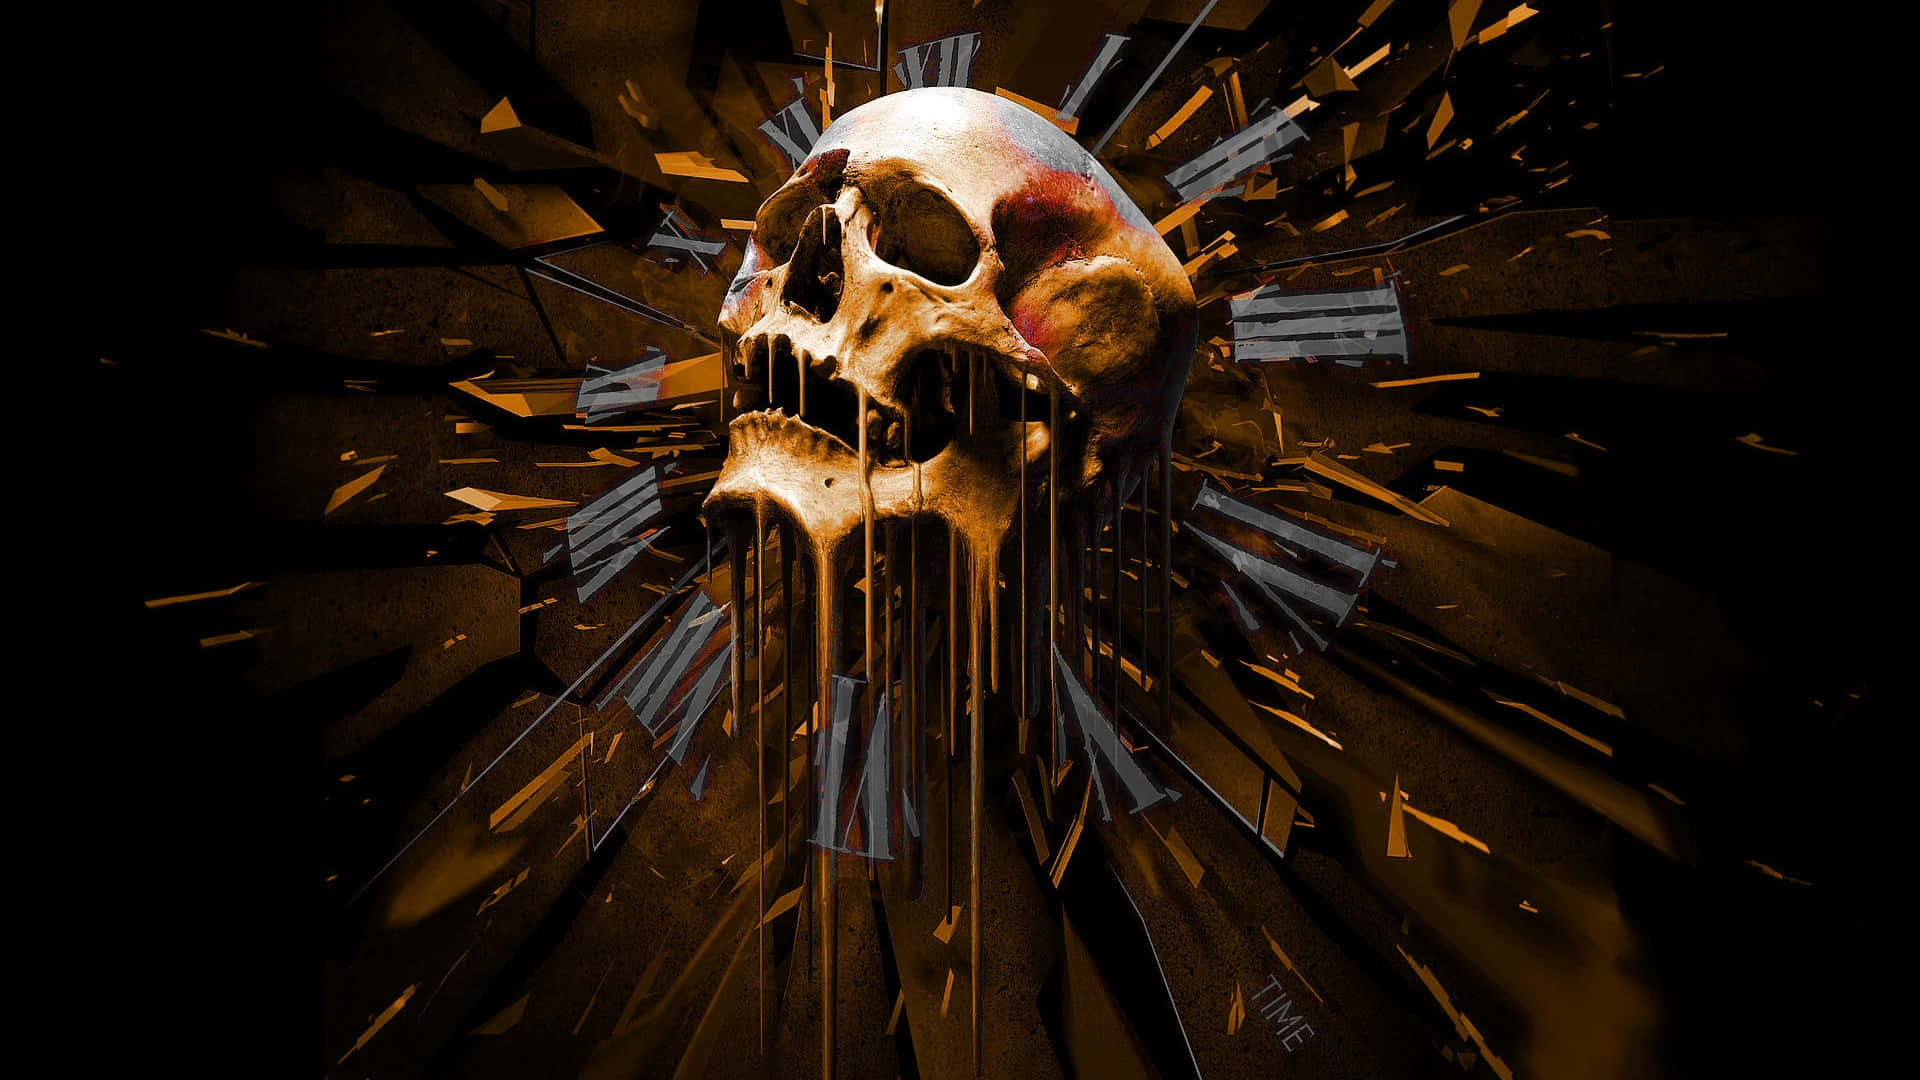 Prepare for a spooky night with this evil skull! Wallpaper